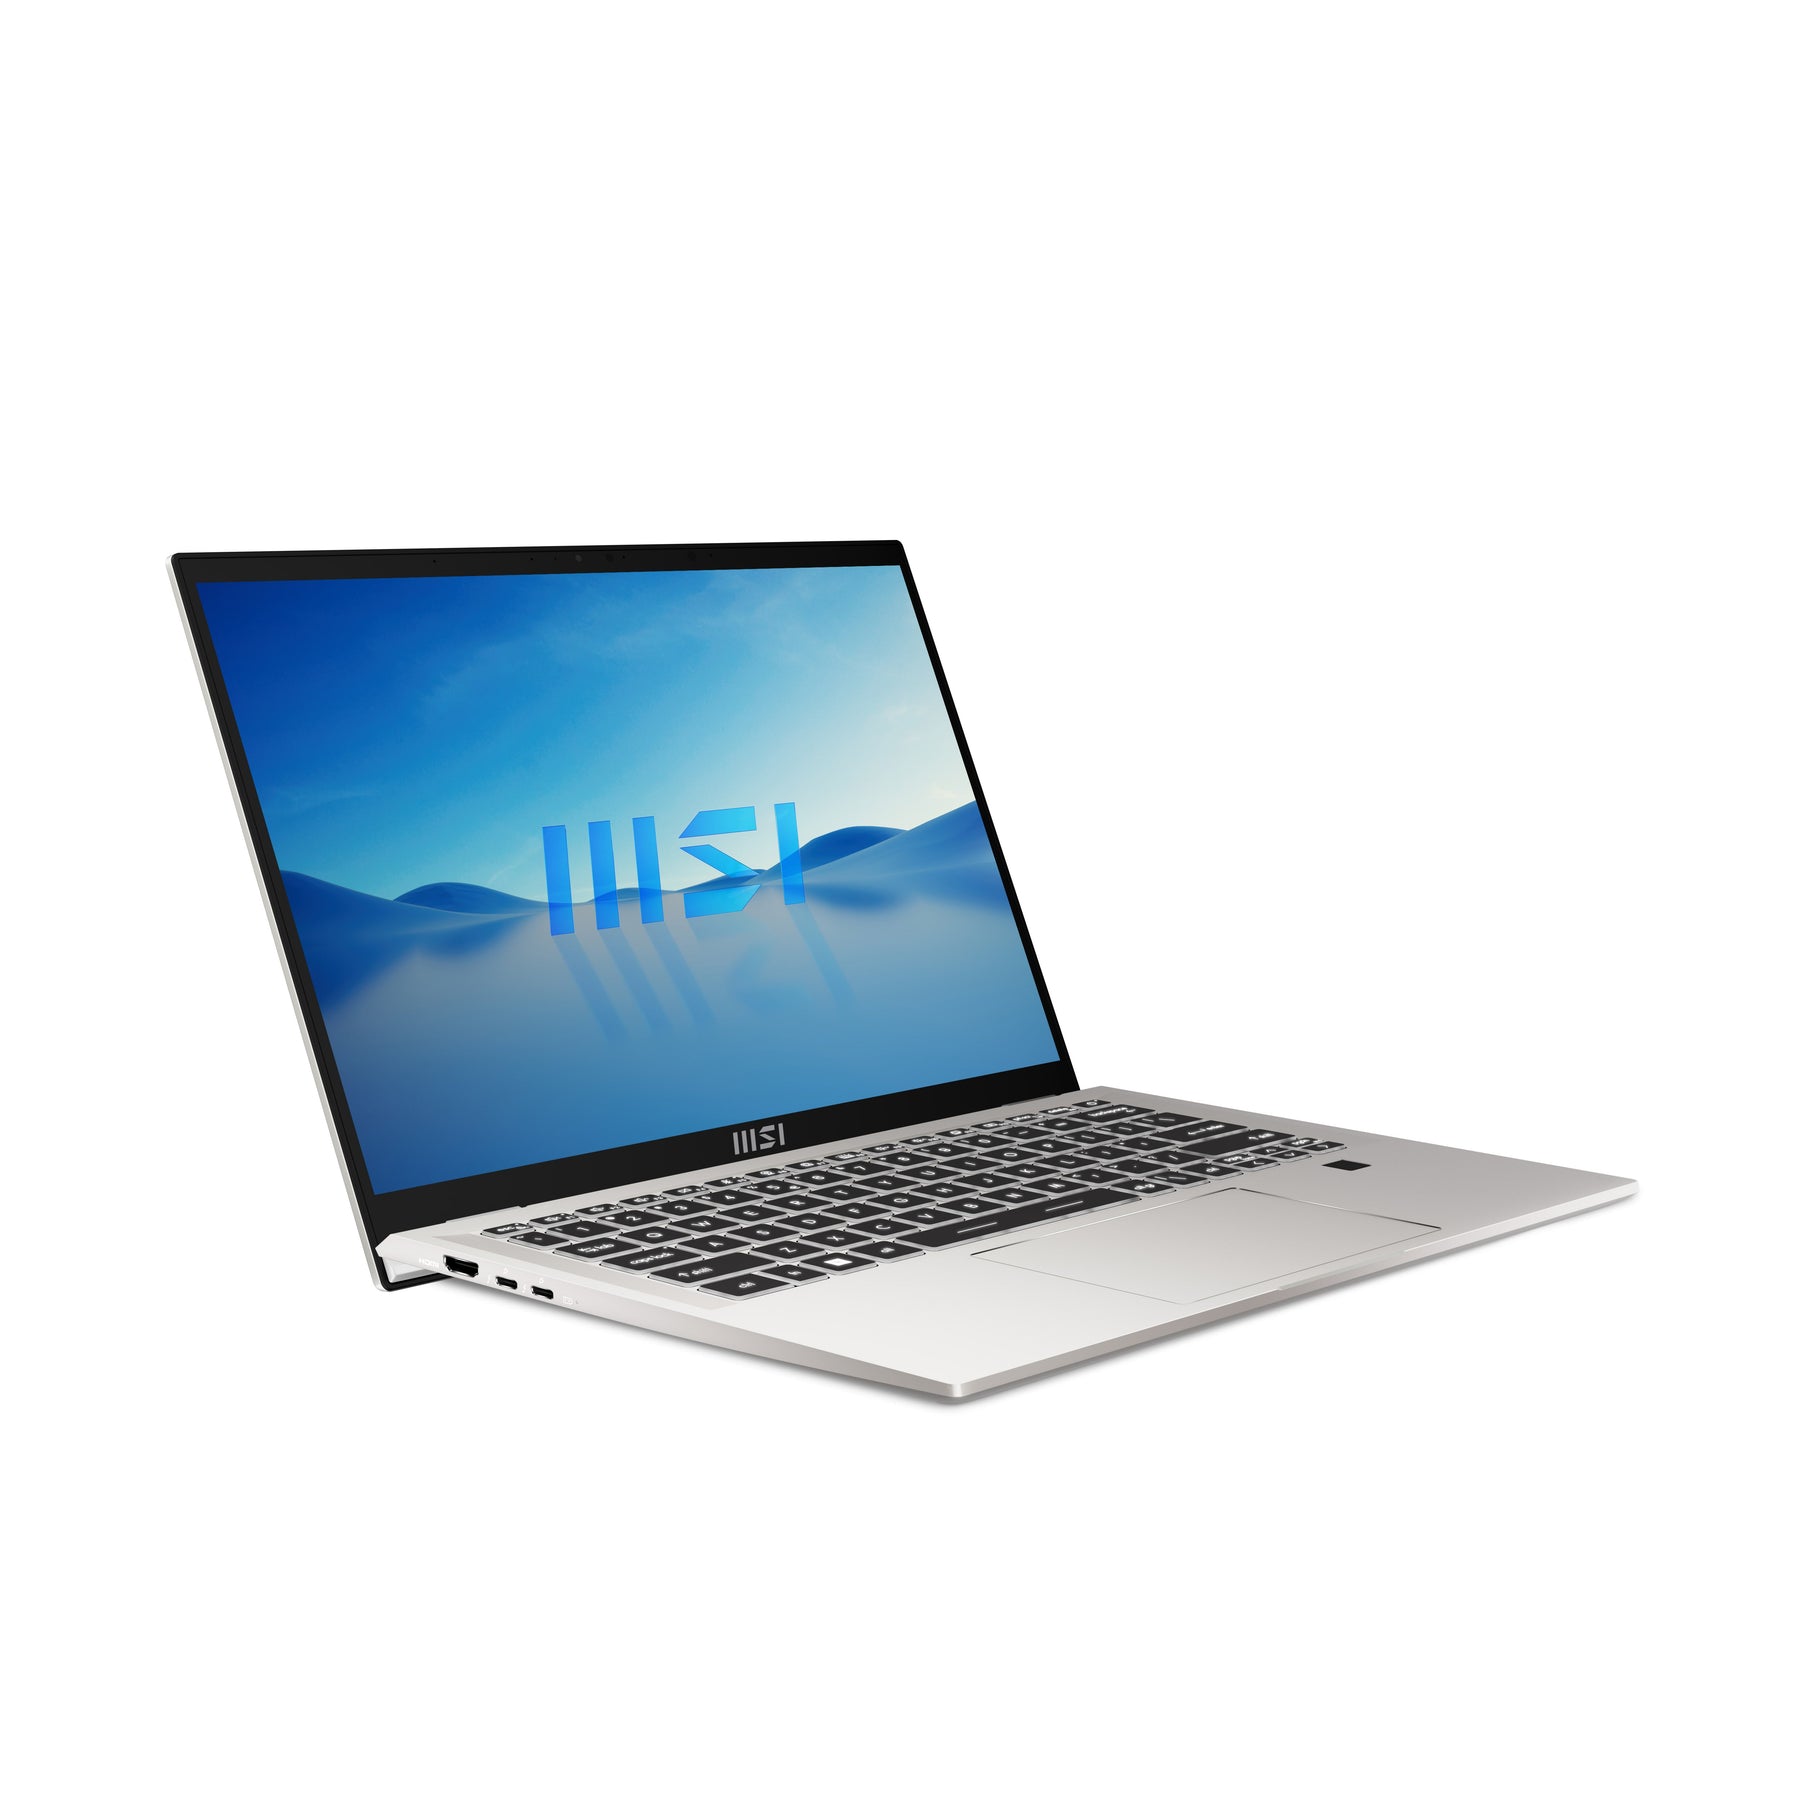 Intel i5 Business Laptop by ManMade Cycle